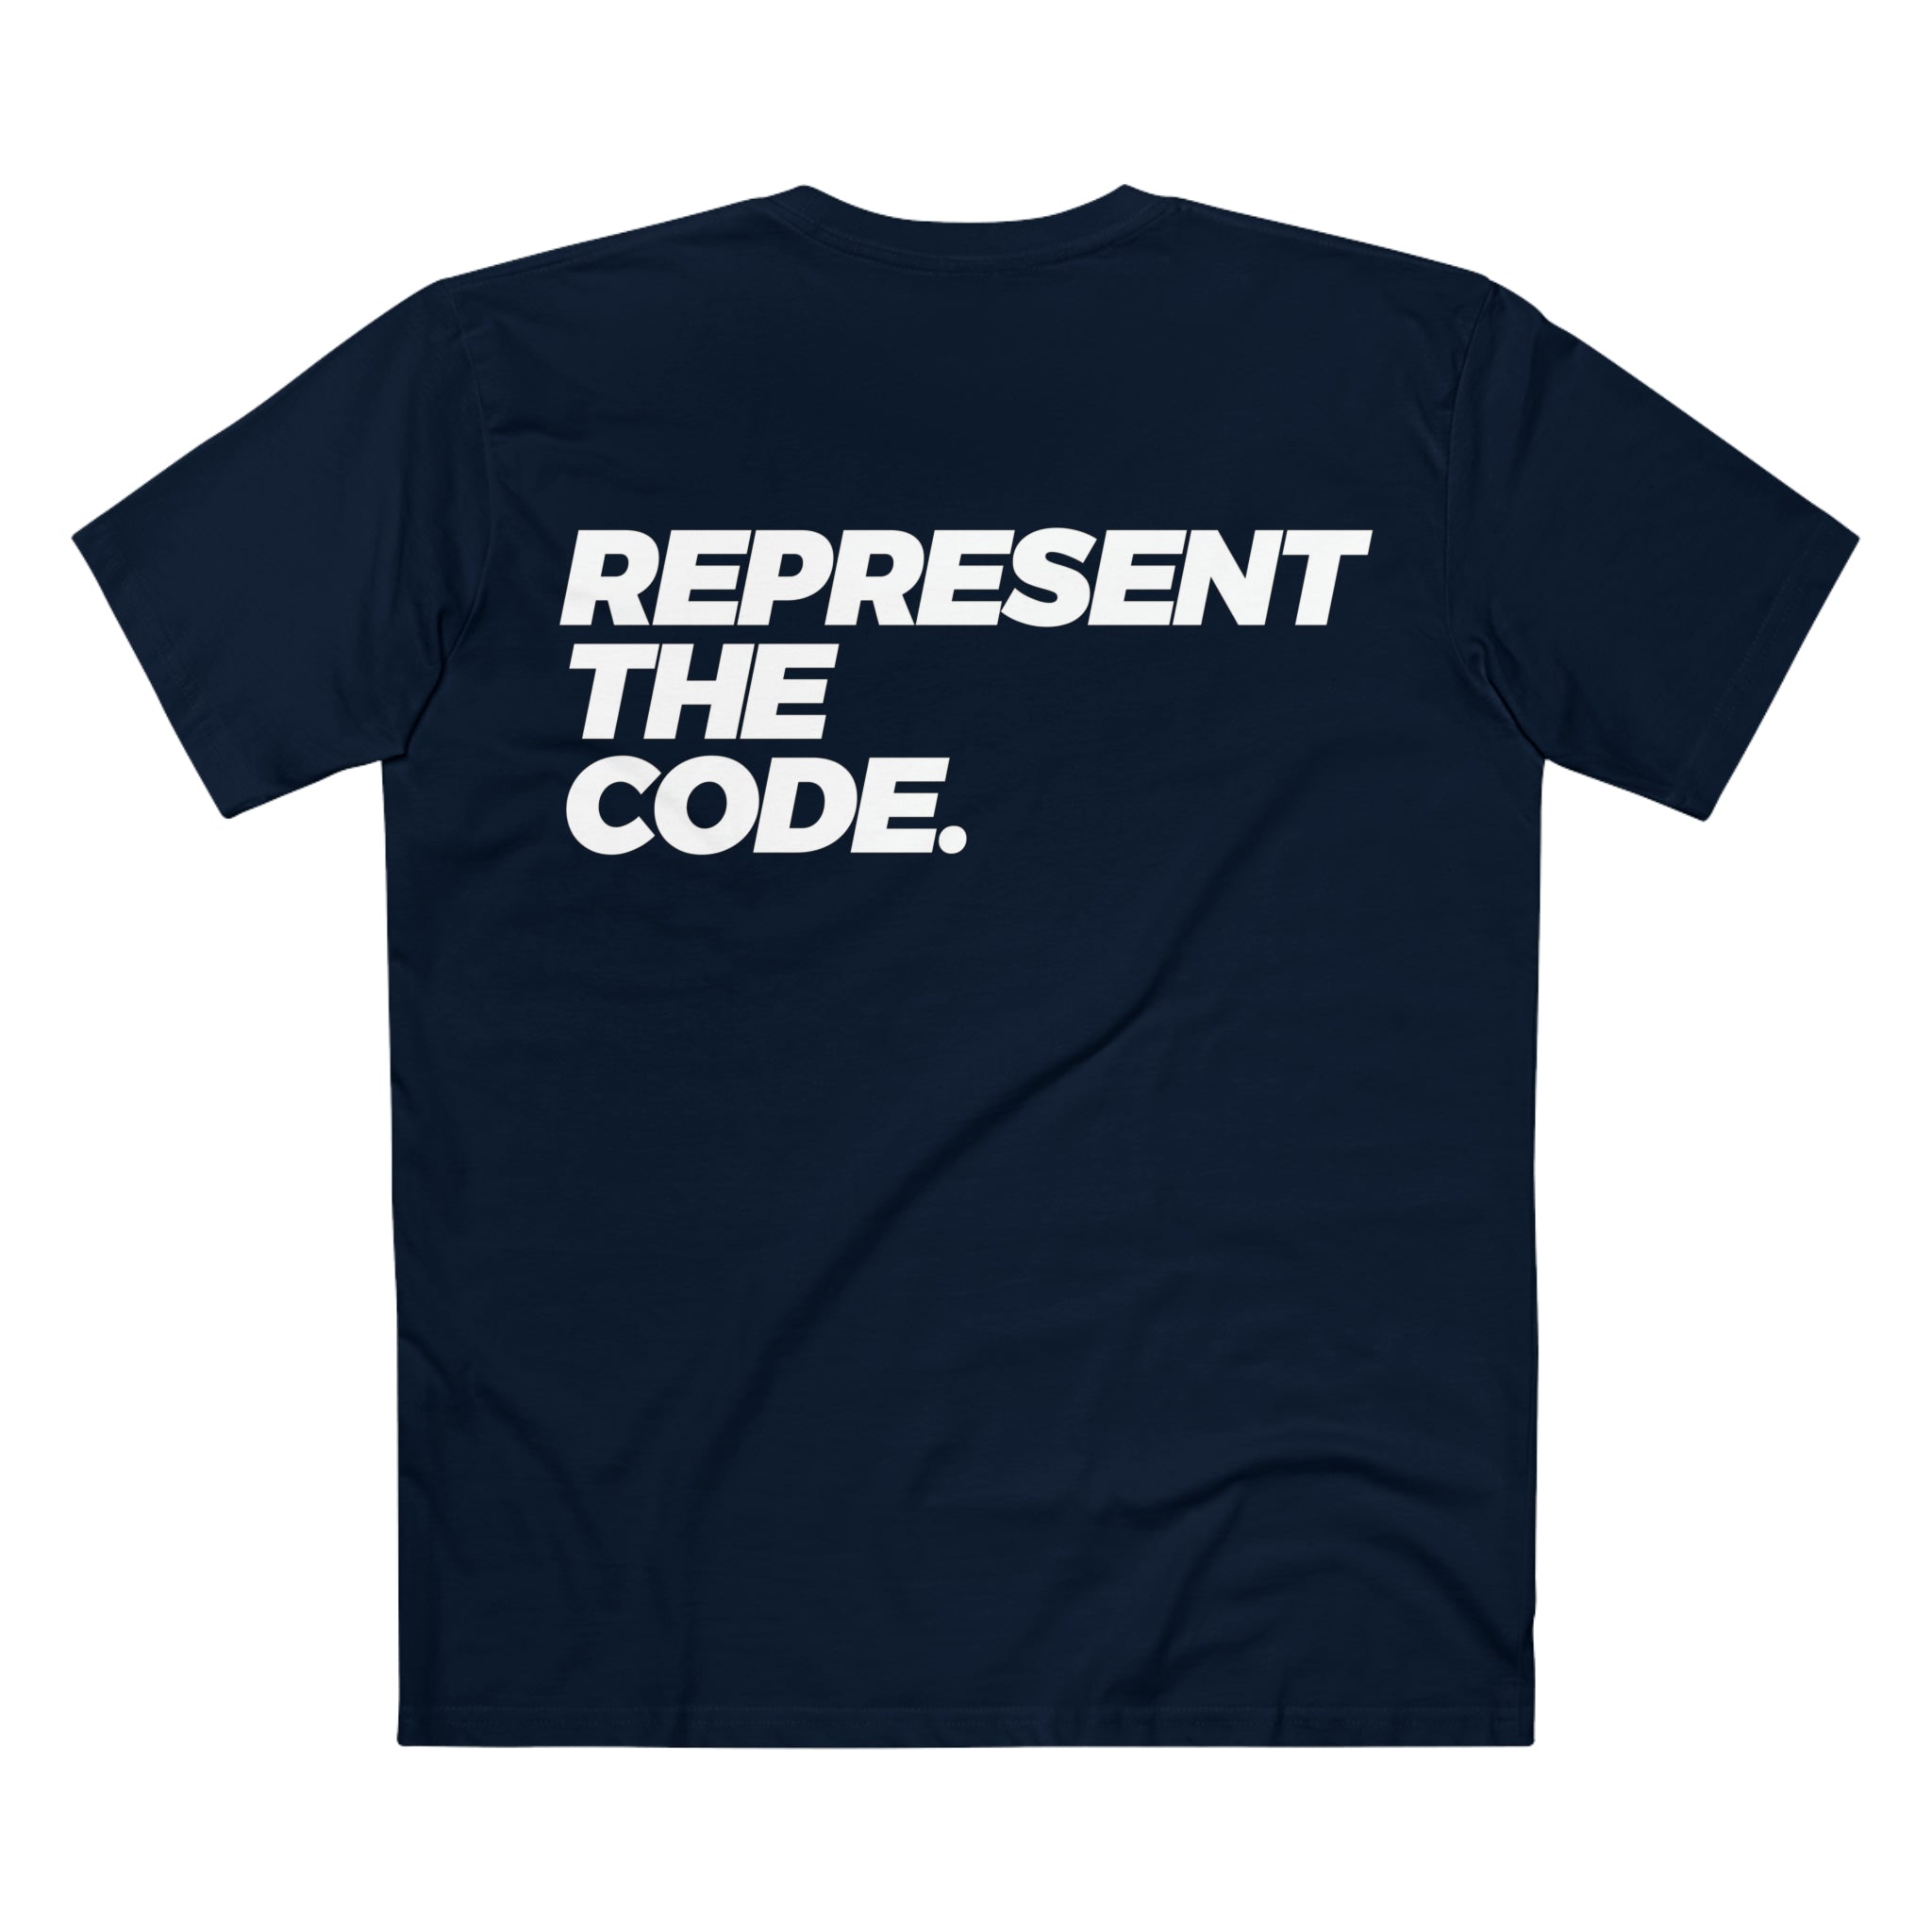 402) The REPRESENT CLASSIC U Tee - Limited Edition